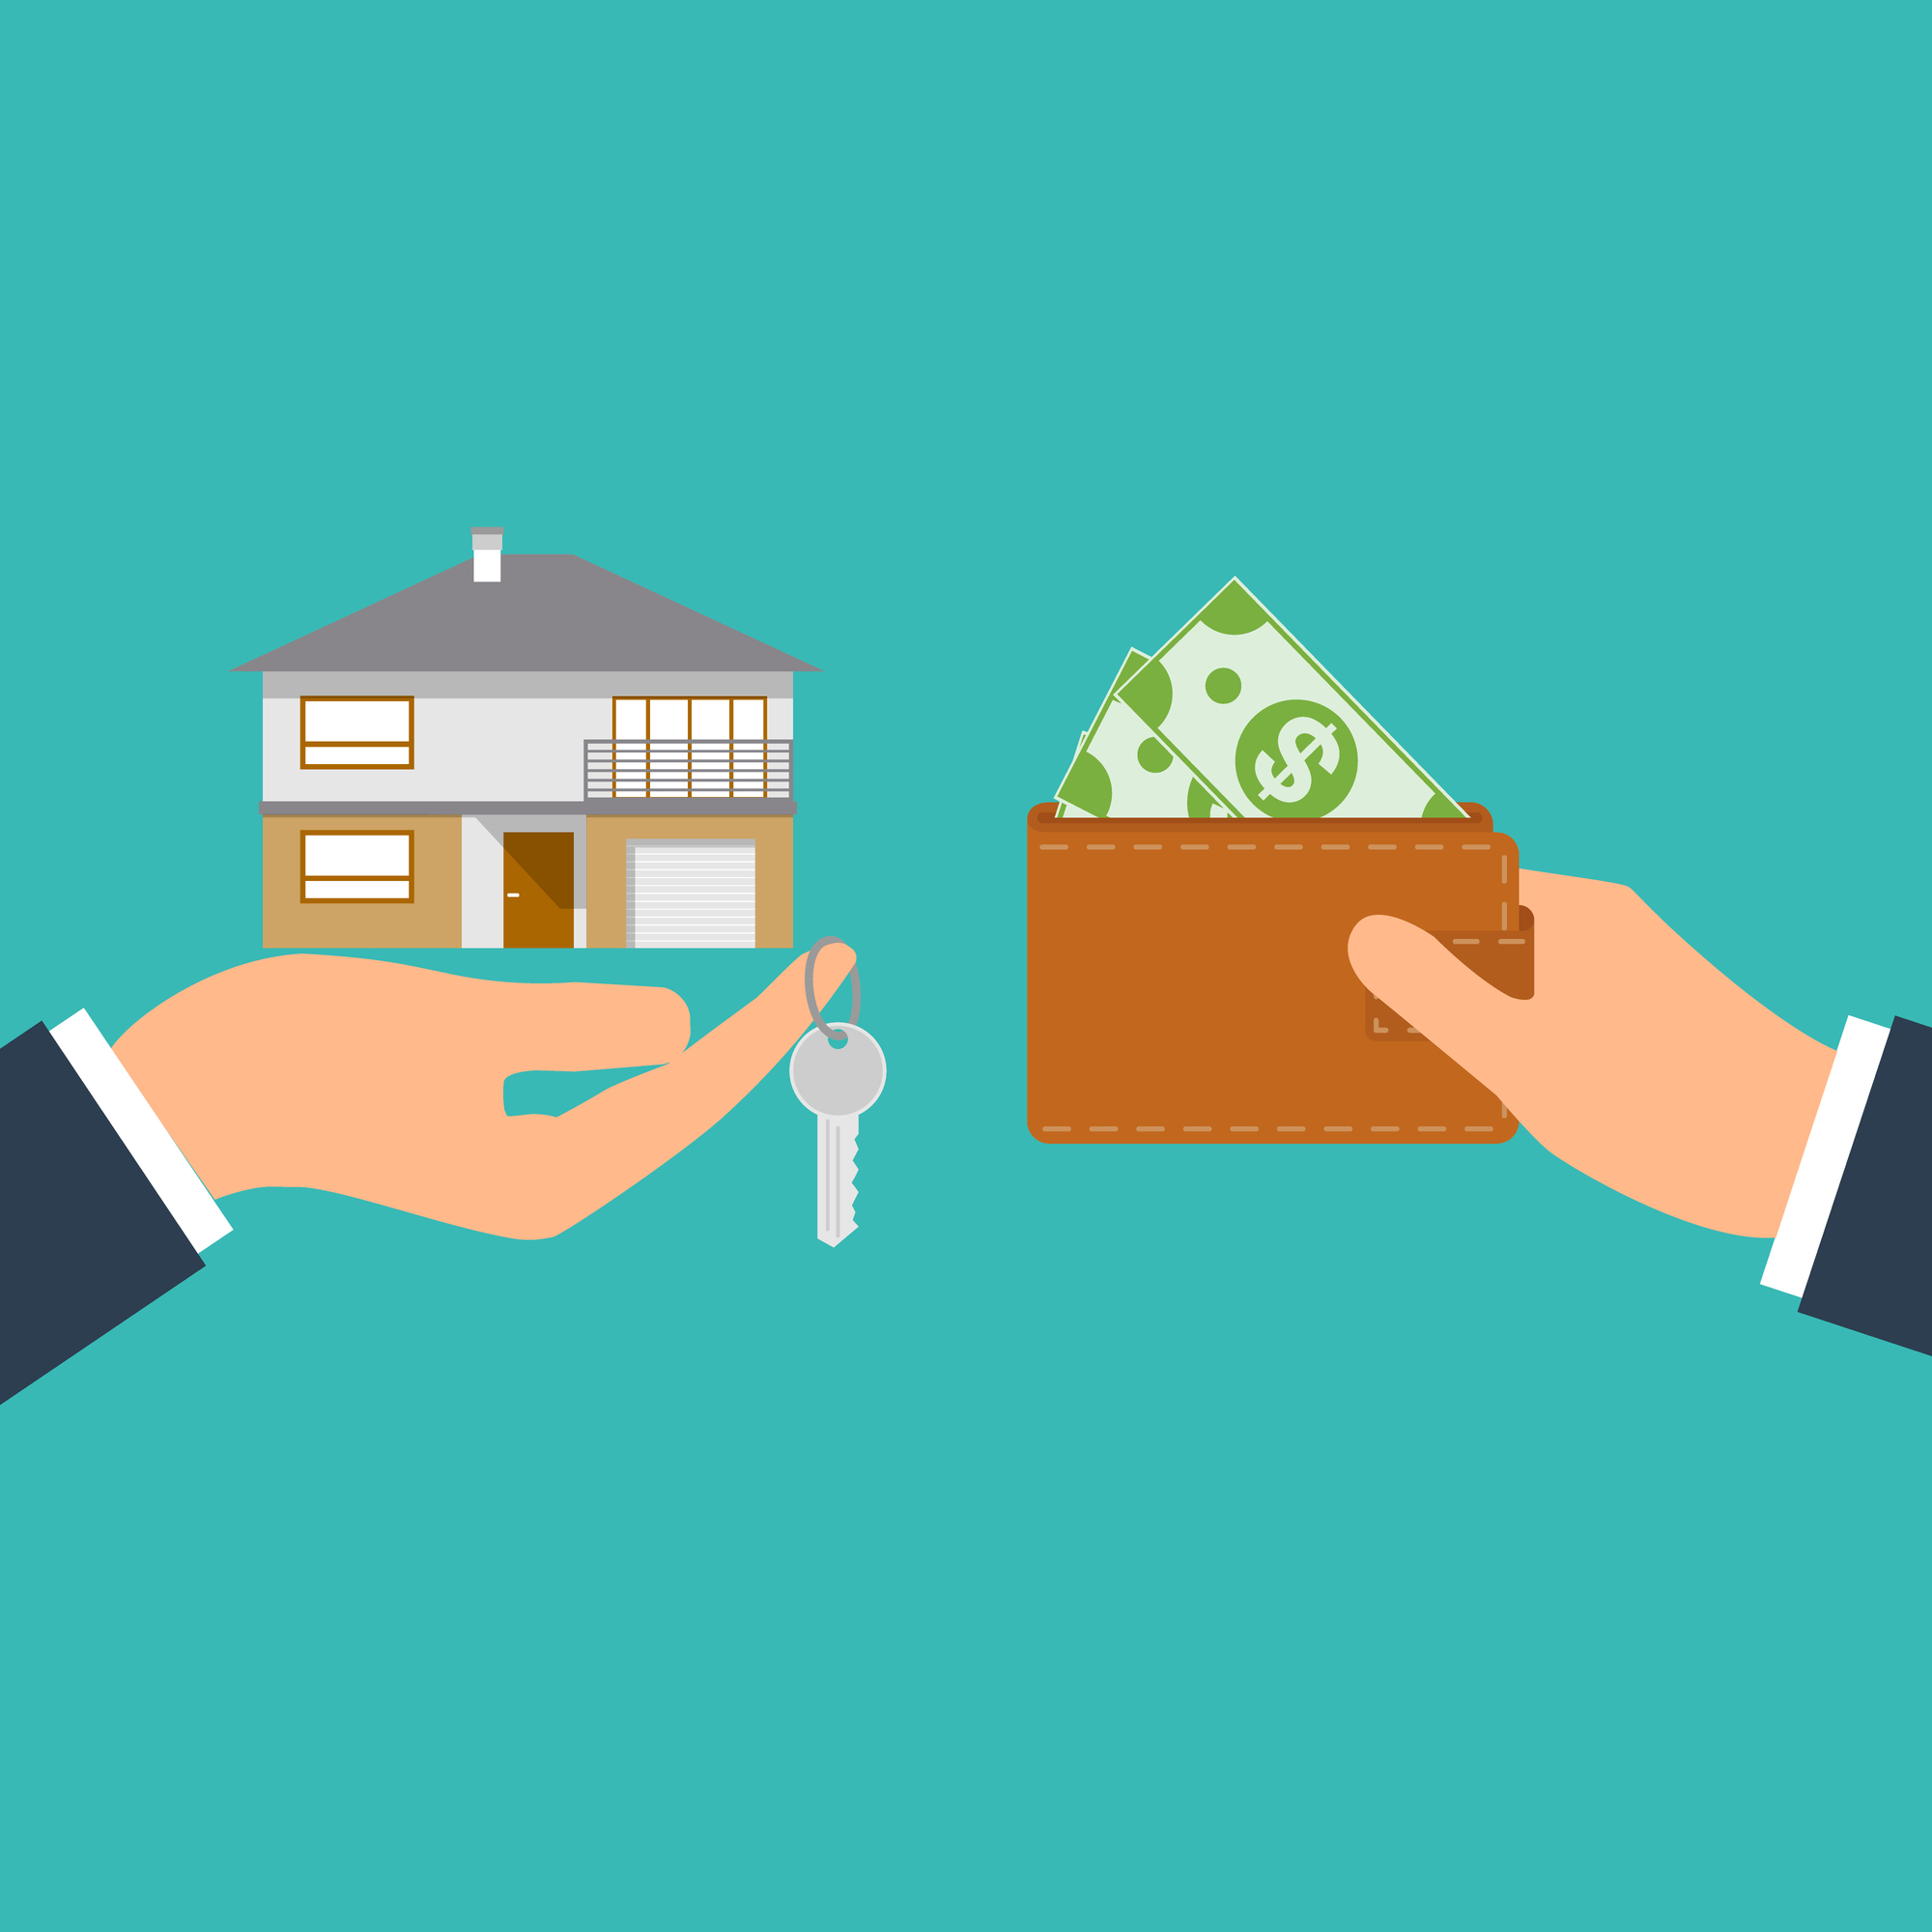 Buying house. Agent of real estate holding in hand house, key. Buyer, customer gives money bag. Deal sale and purchase of real, concept. Vector illustration flat design.